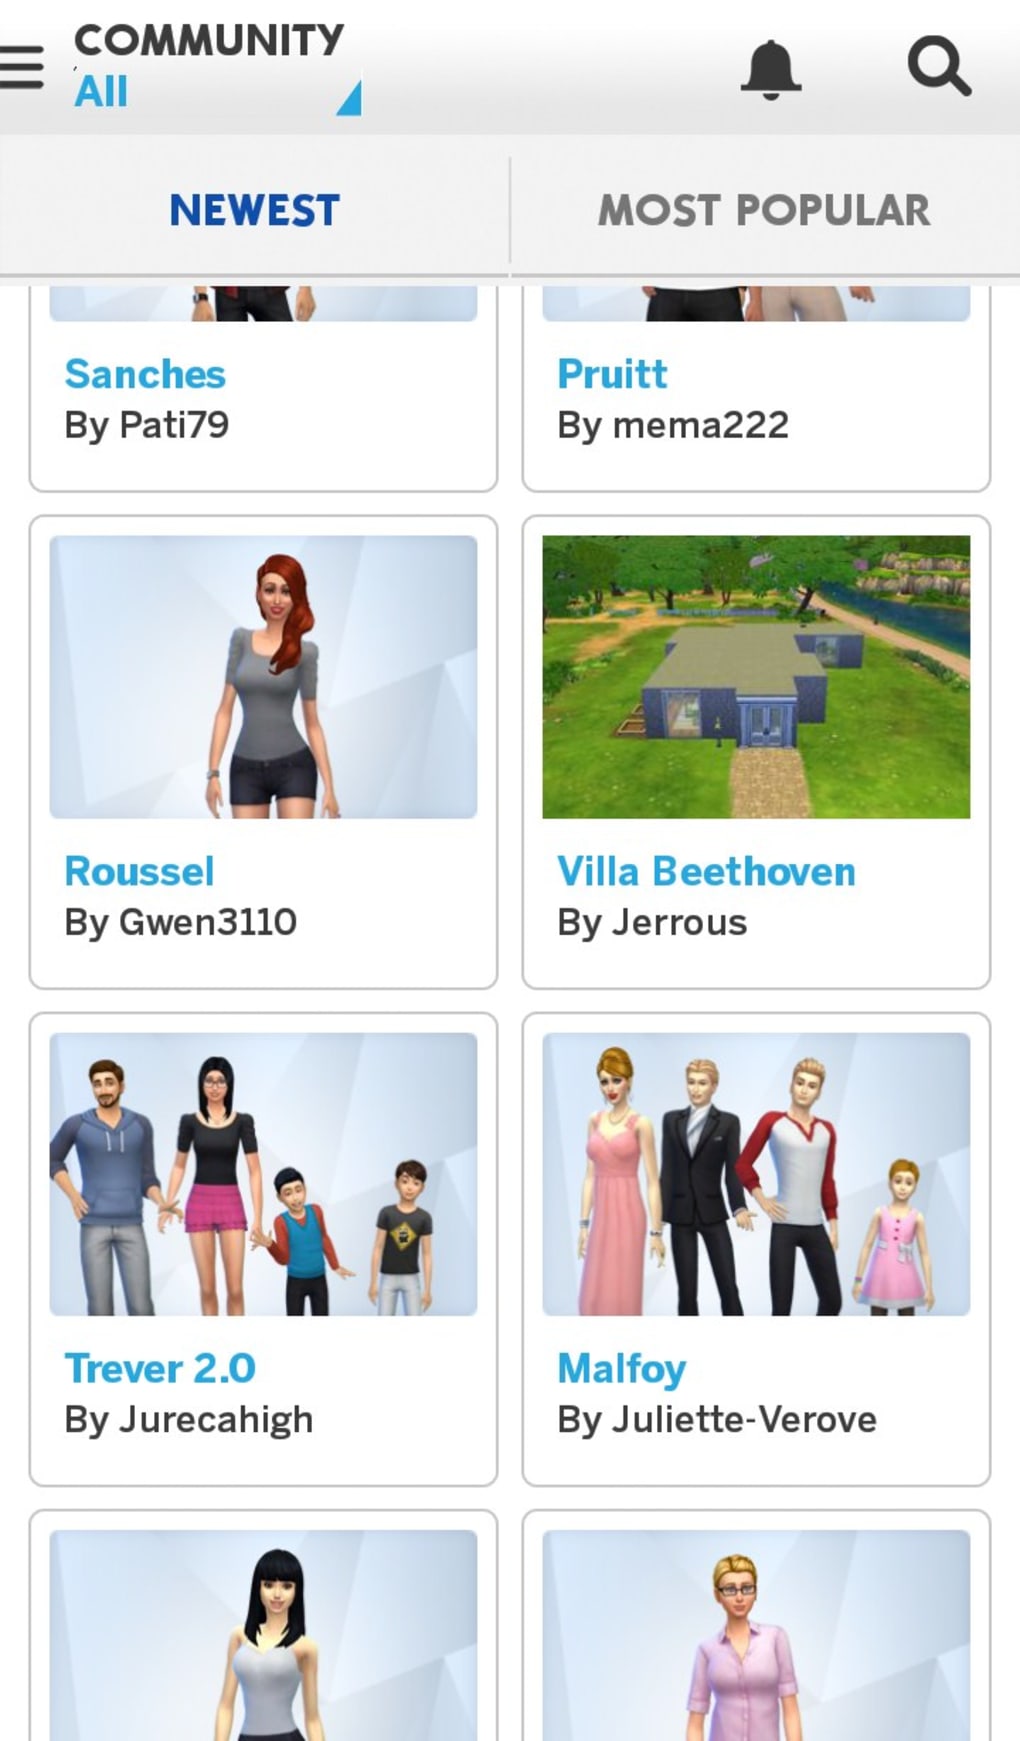 the sims 4 android apk download gratis